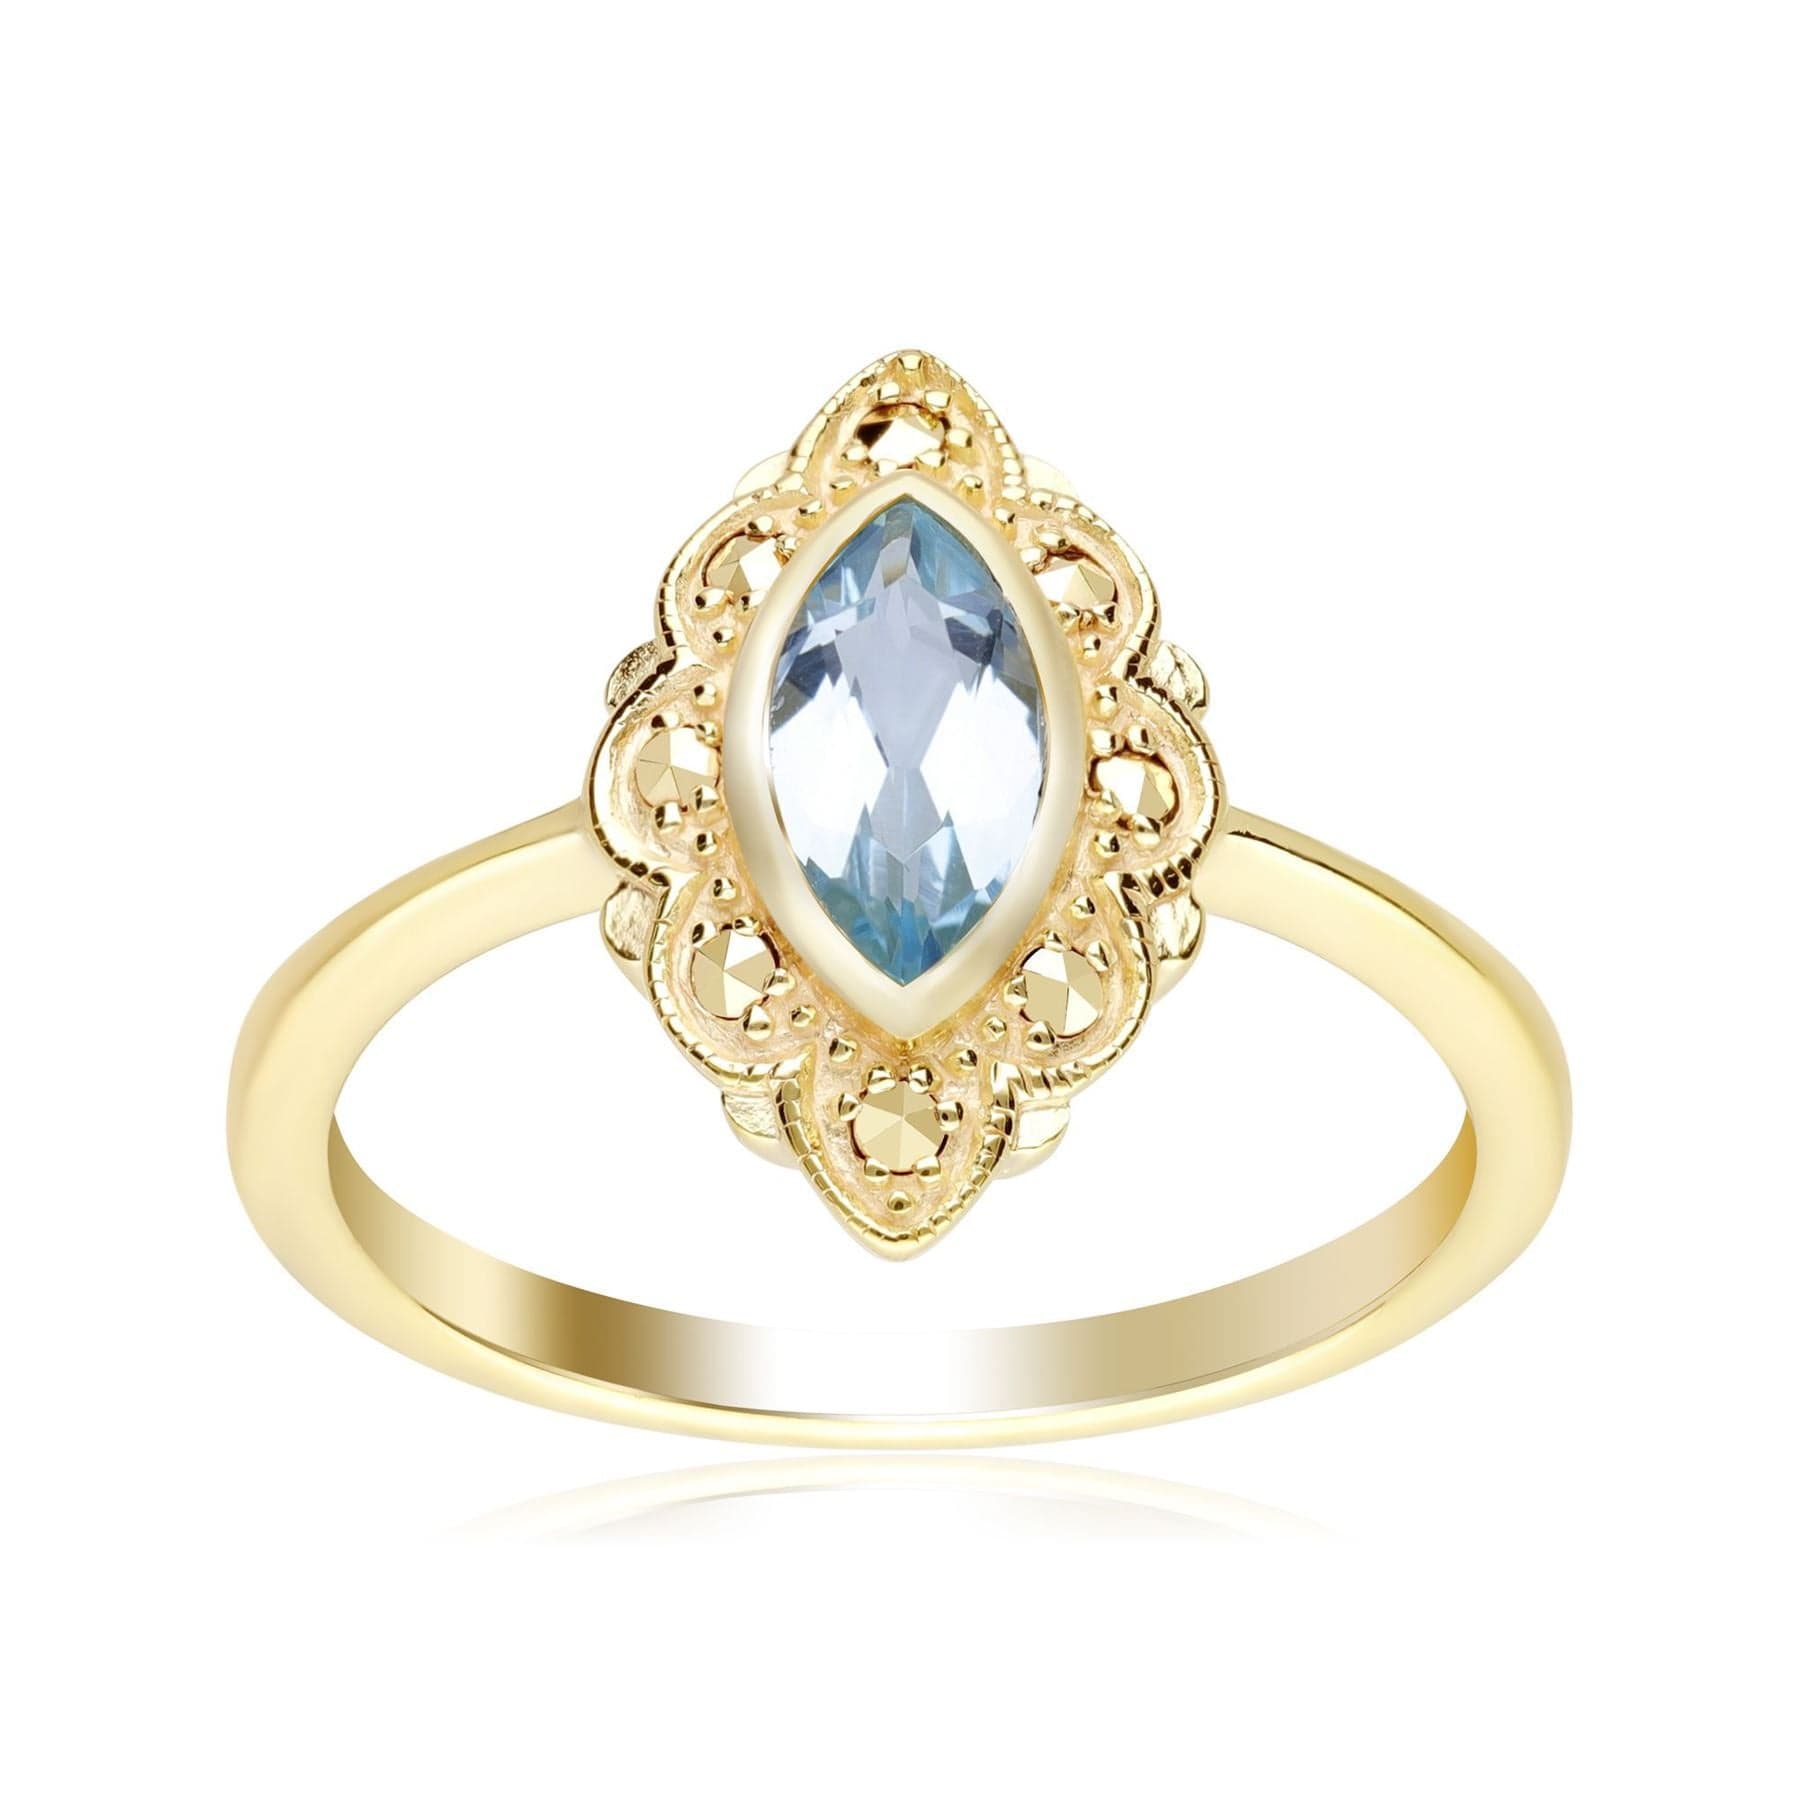 234R043601925 Art Nouveau Inspired Marquise Blue Topaz & Marcasite Ring in 18ct Gold Plated Silver 2